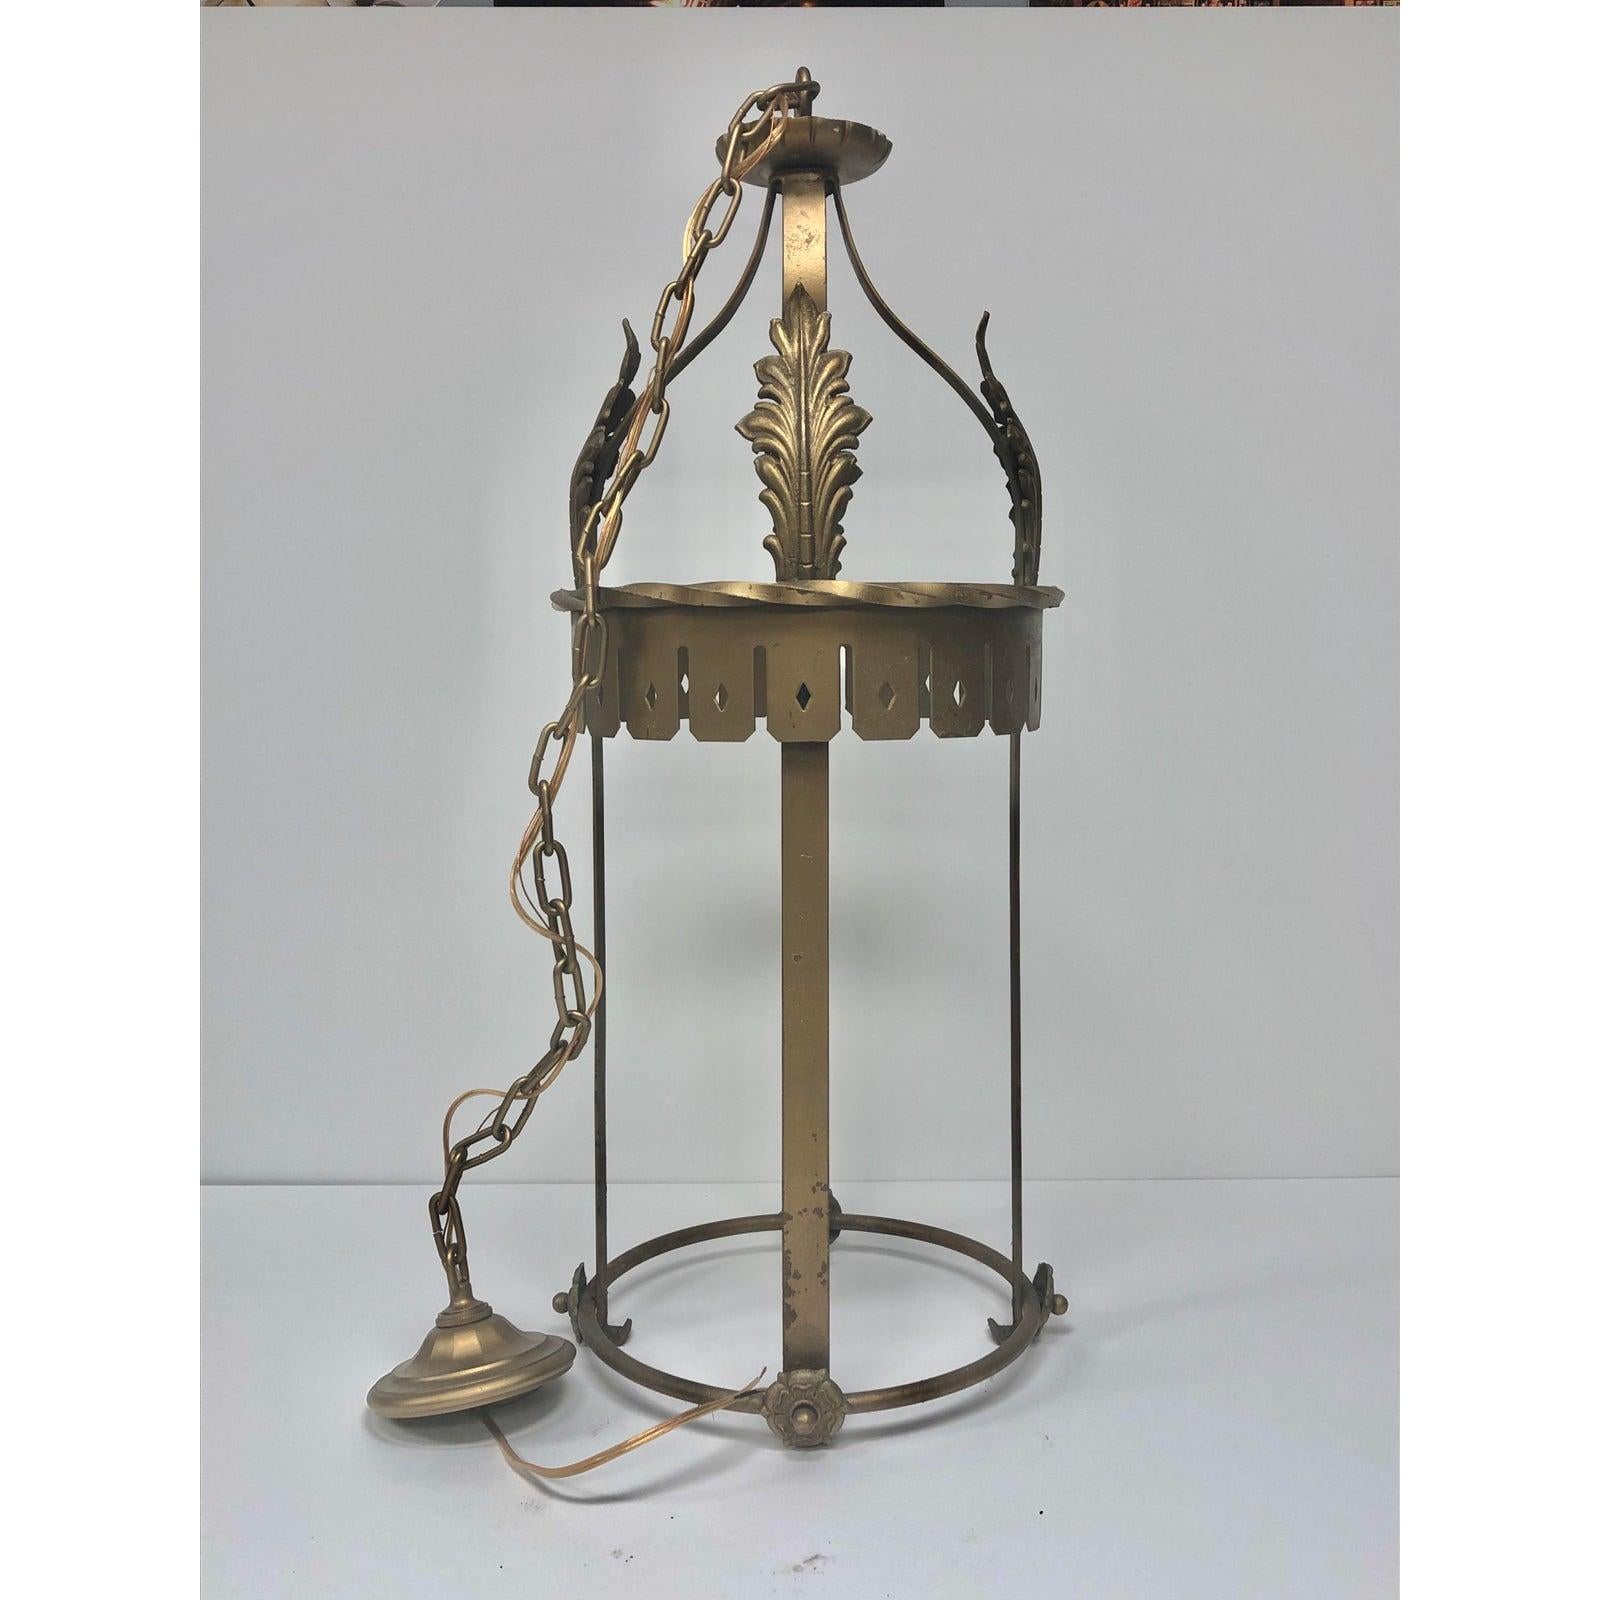 Large antique French decorative lantern. Fixture 42.75”, chain 33.75” long. Recently rewired. It holds one bulb. 3 lanterns available.